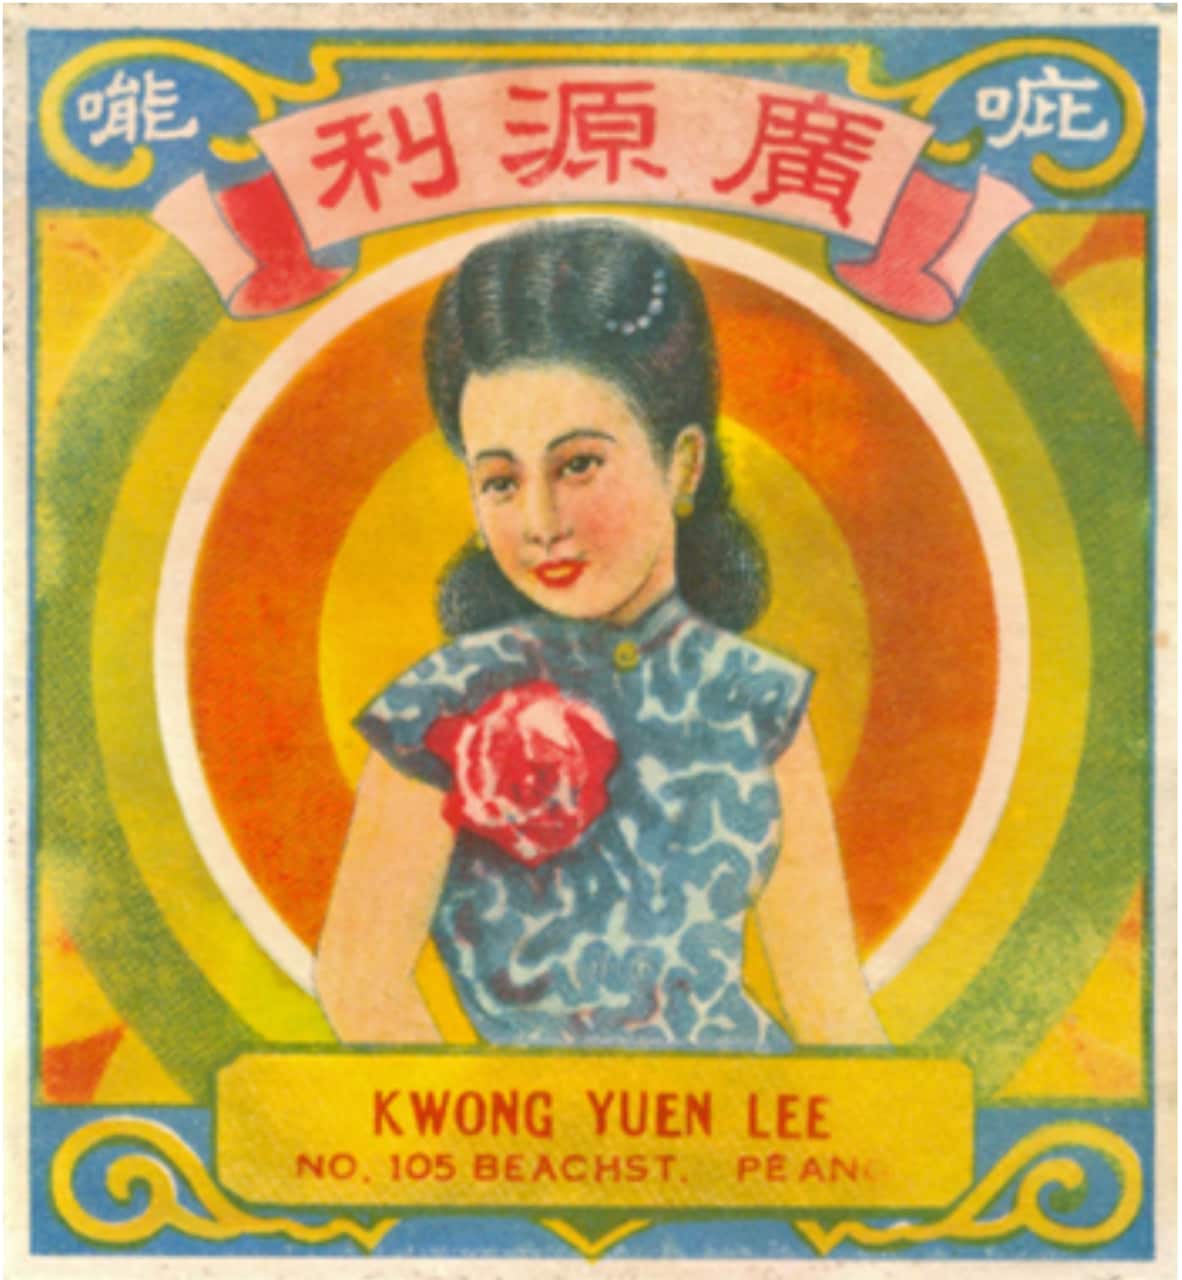 Photograph of colourful Malaysian advert featuring a woman in traditional dress